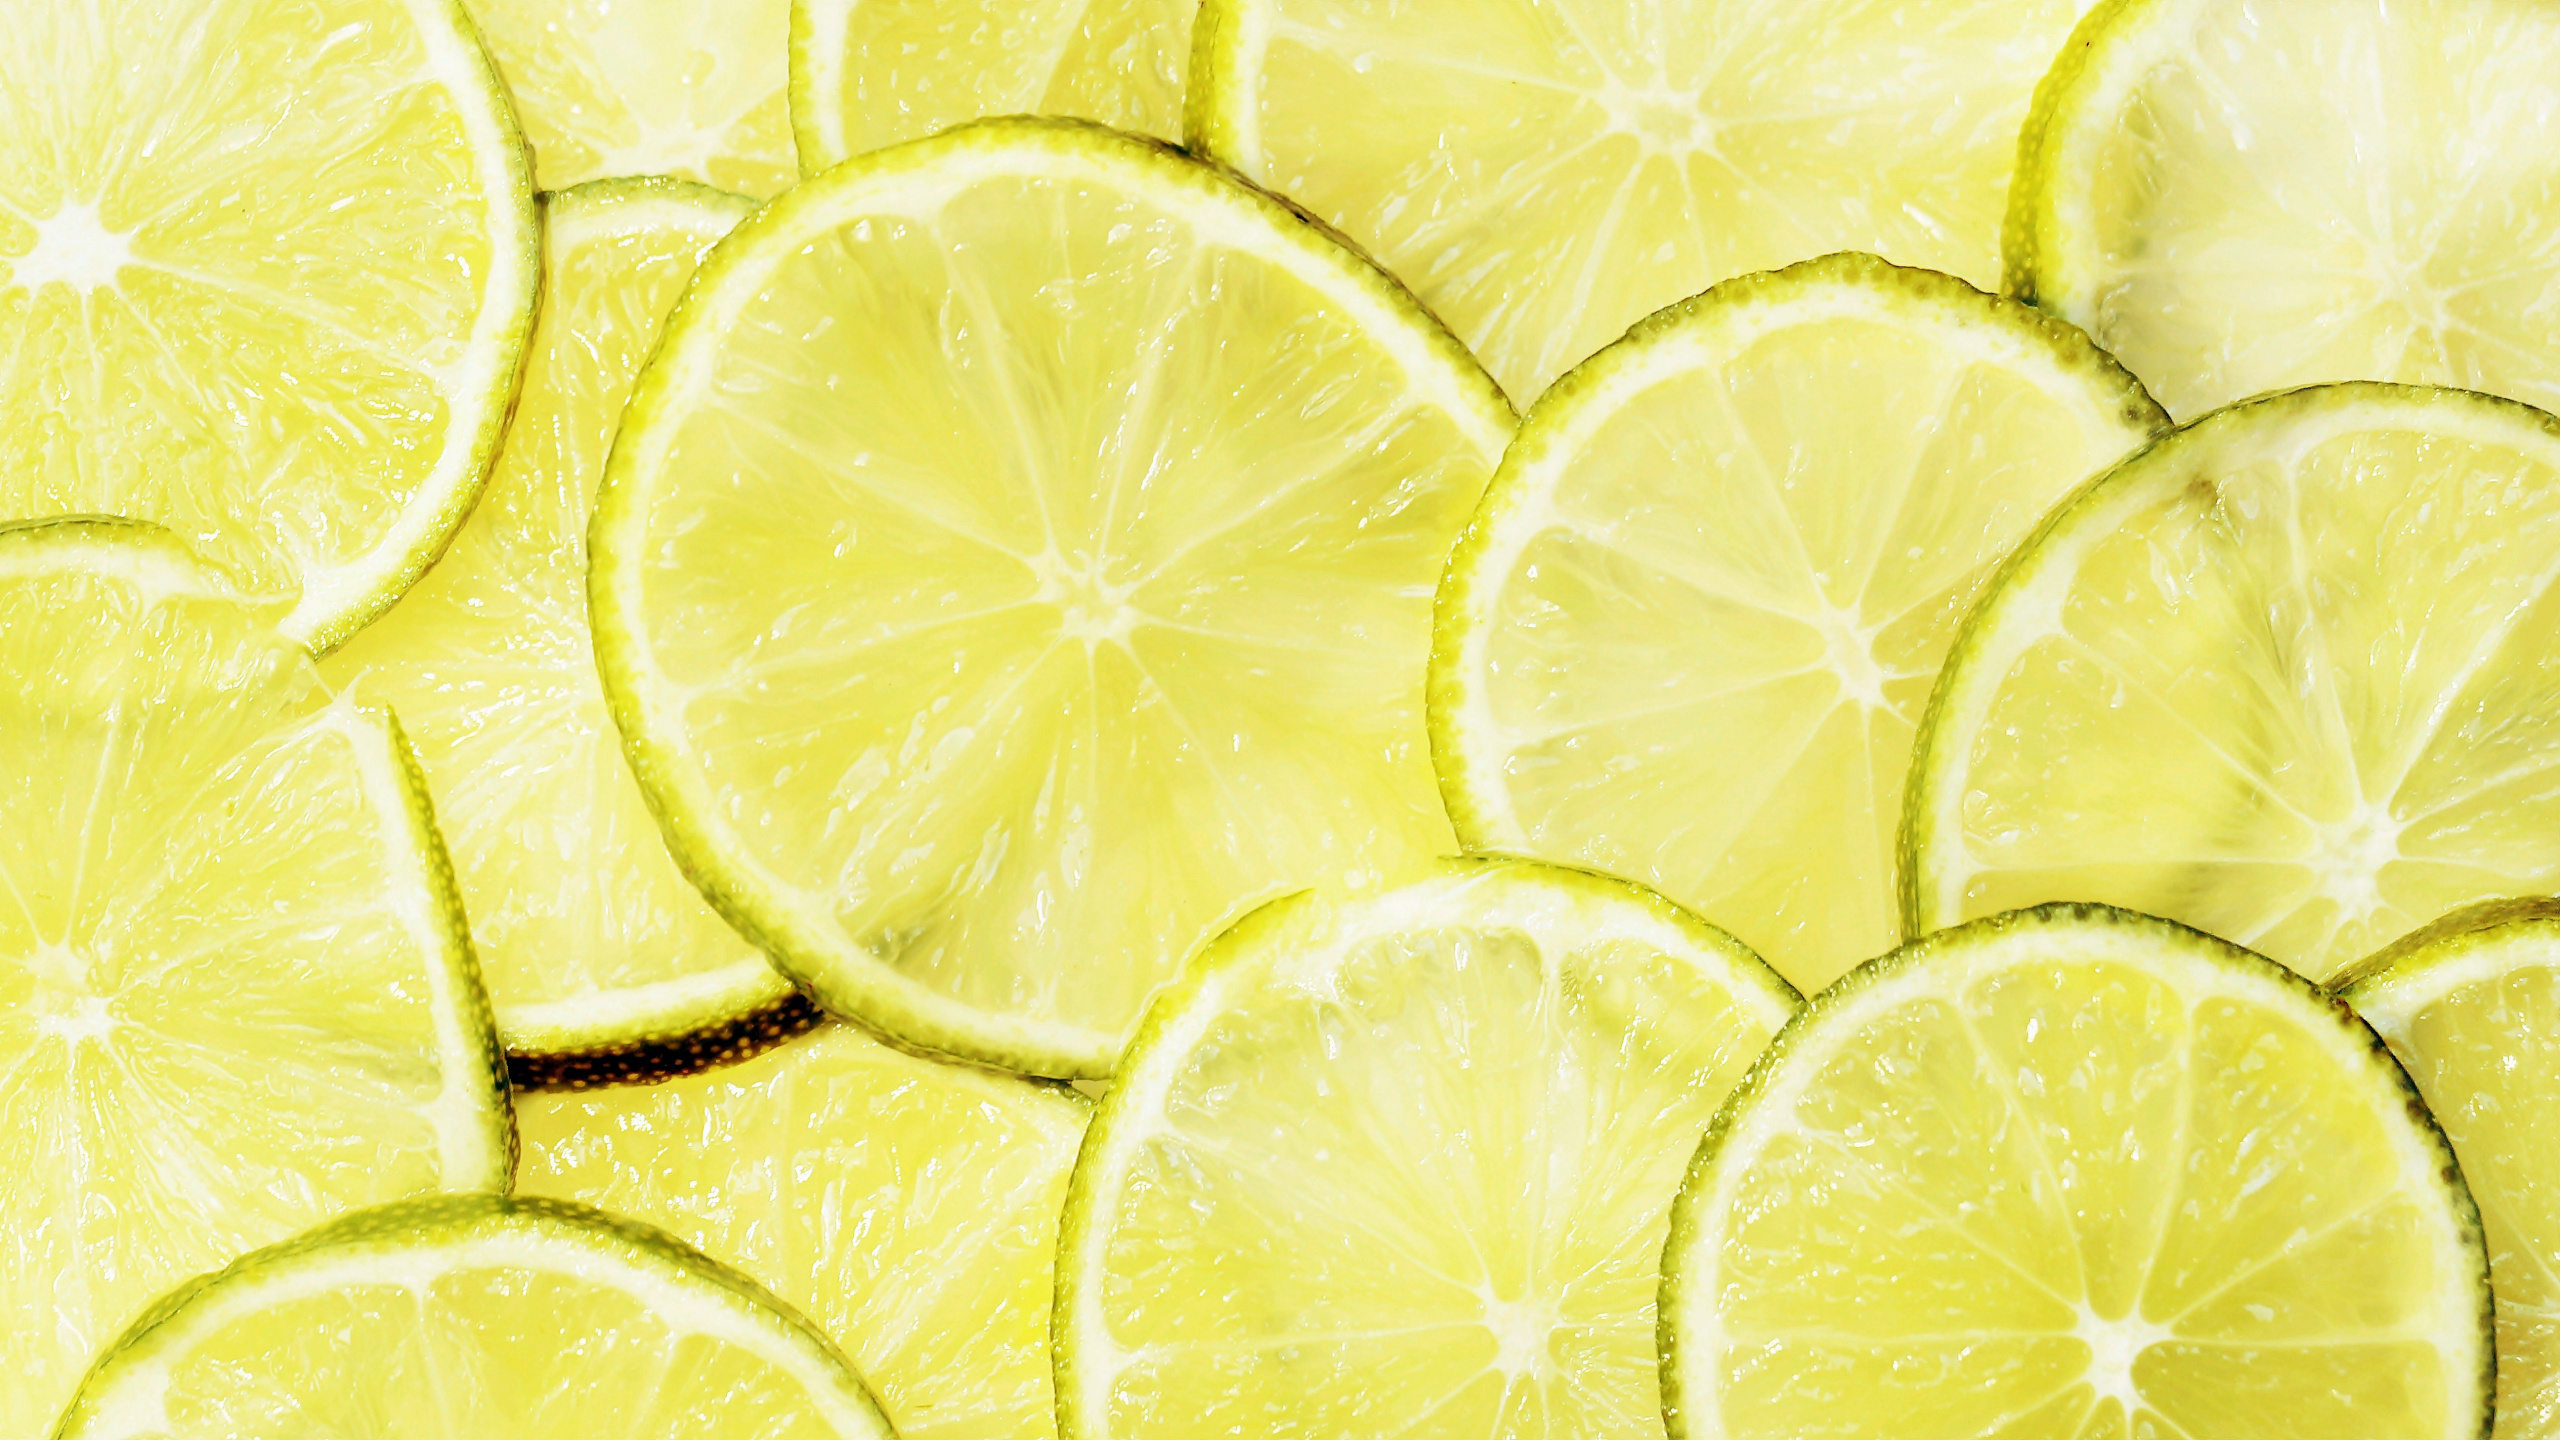 Yellow Lemon Fruit With Water Droplets. Wallpaper in 2560x1440 Resolution